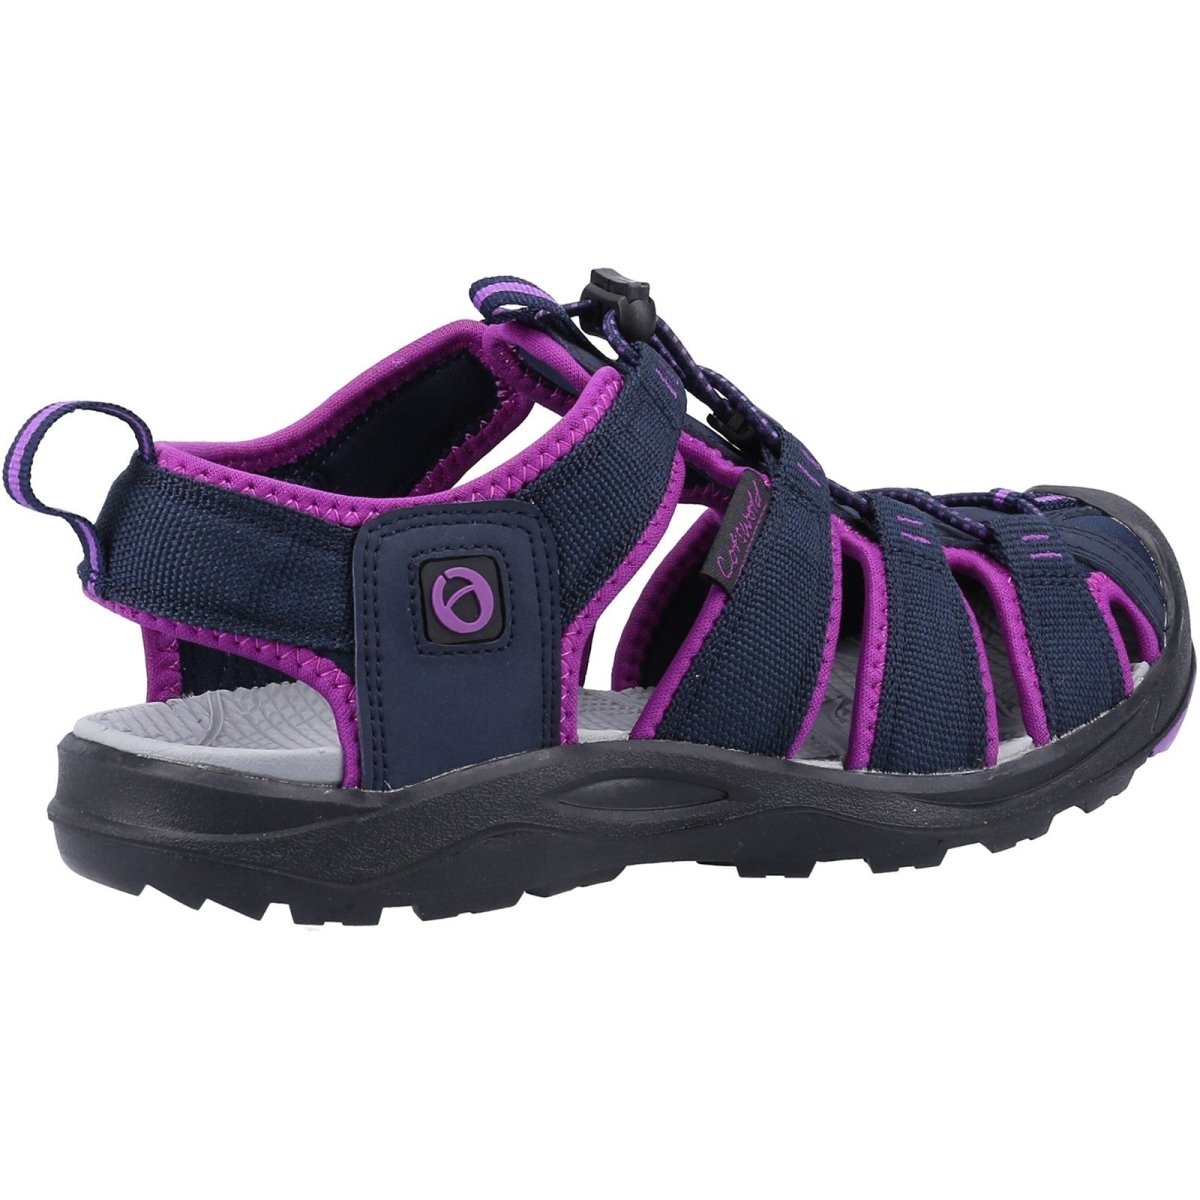 Cotswold Marshfield Ladies Summer Walking Recycled Sandals - Shoe Store Direct